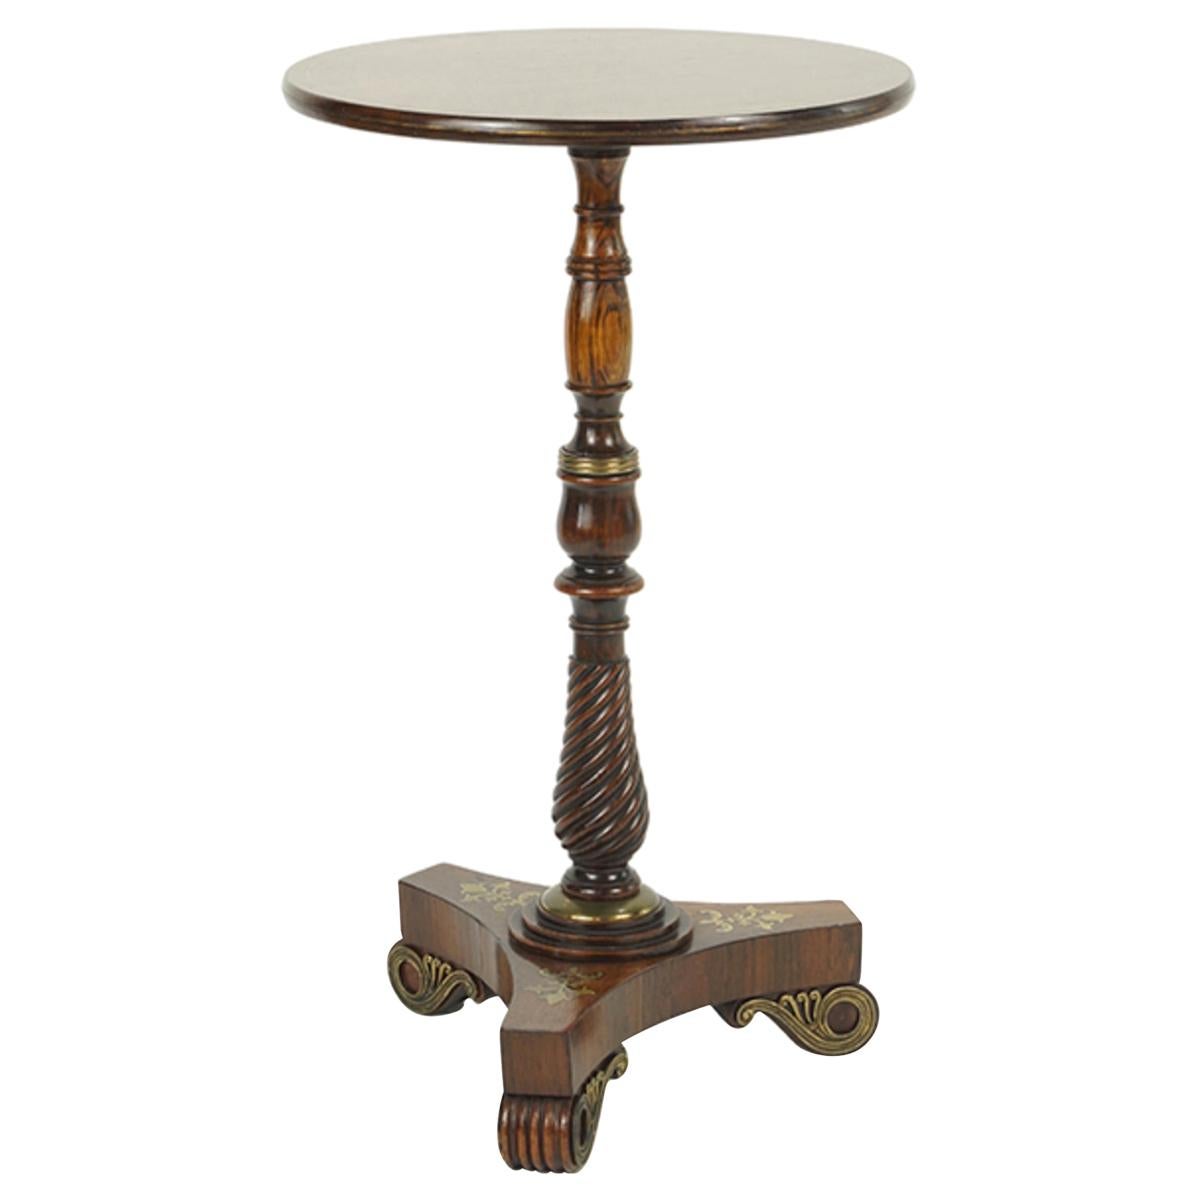 English Regency Rosewood Side Table with Brass Inlay and Mount's, Great Color